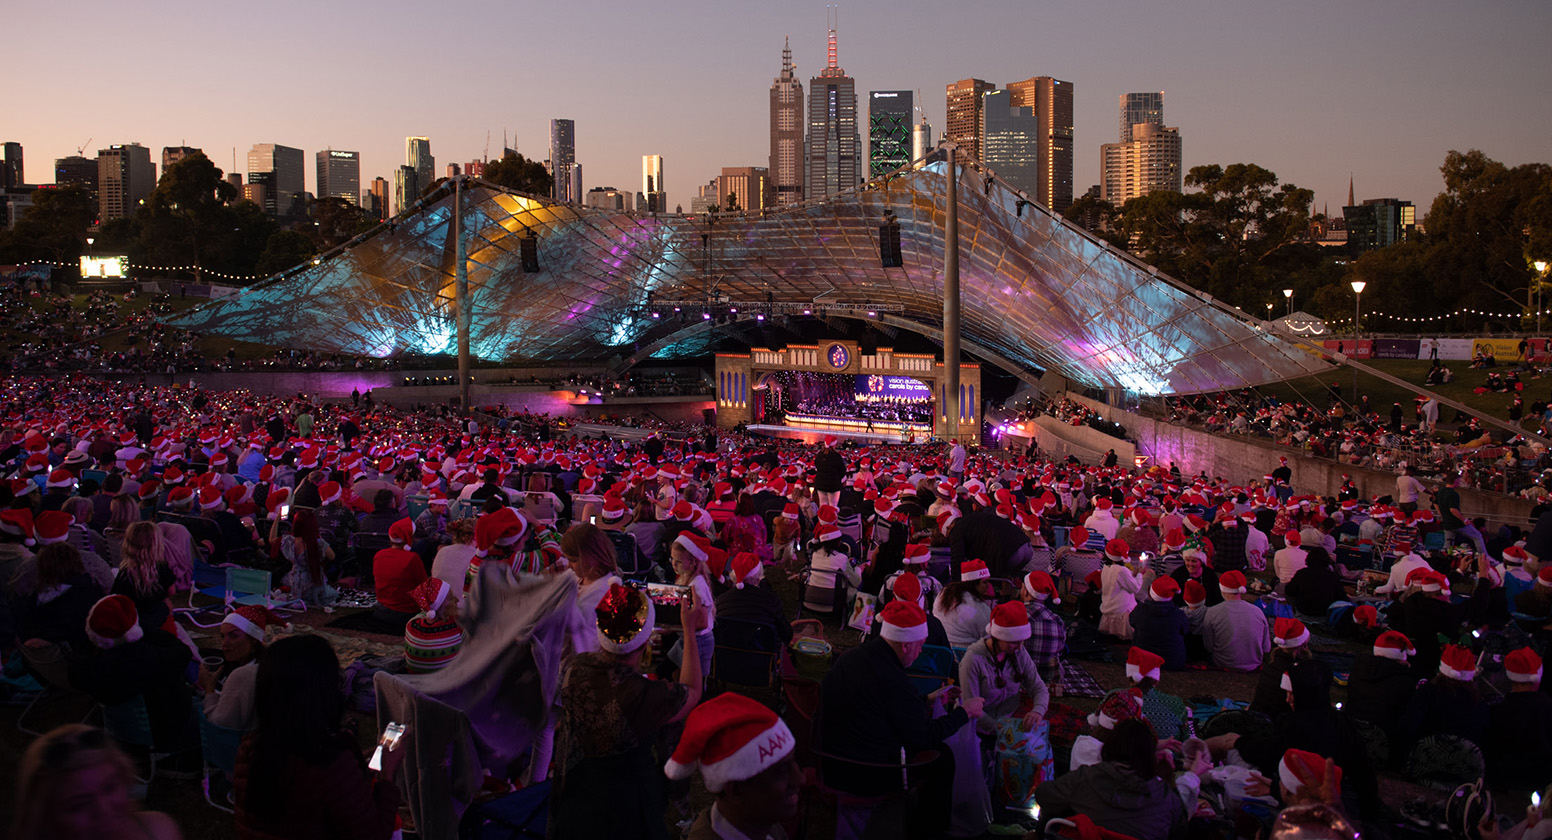 Carols audience and stage at twilight